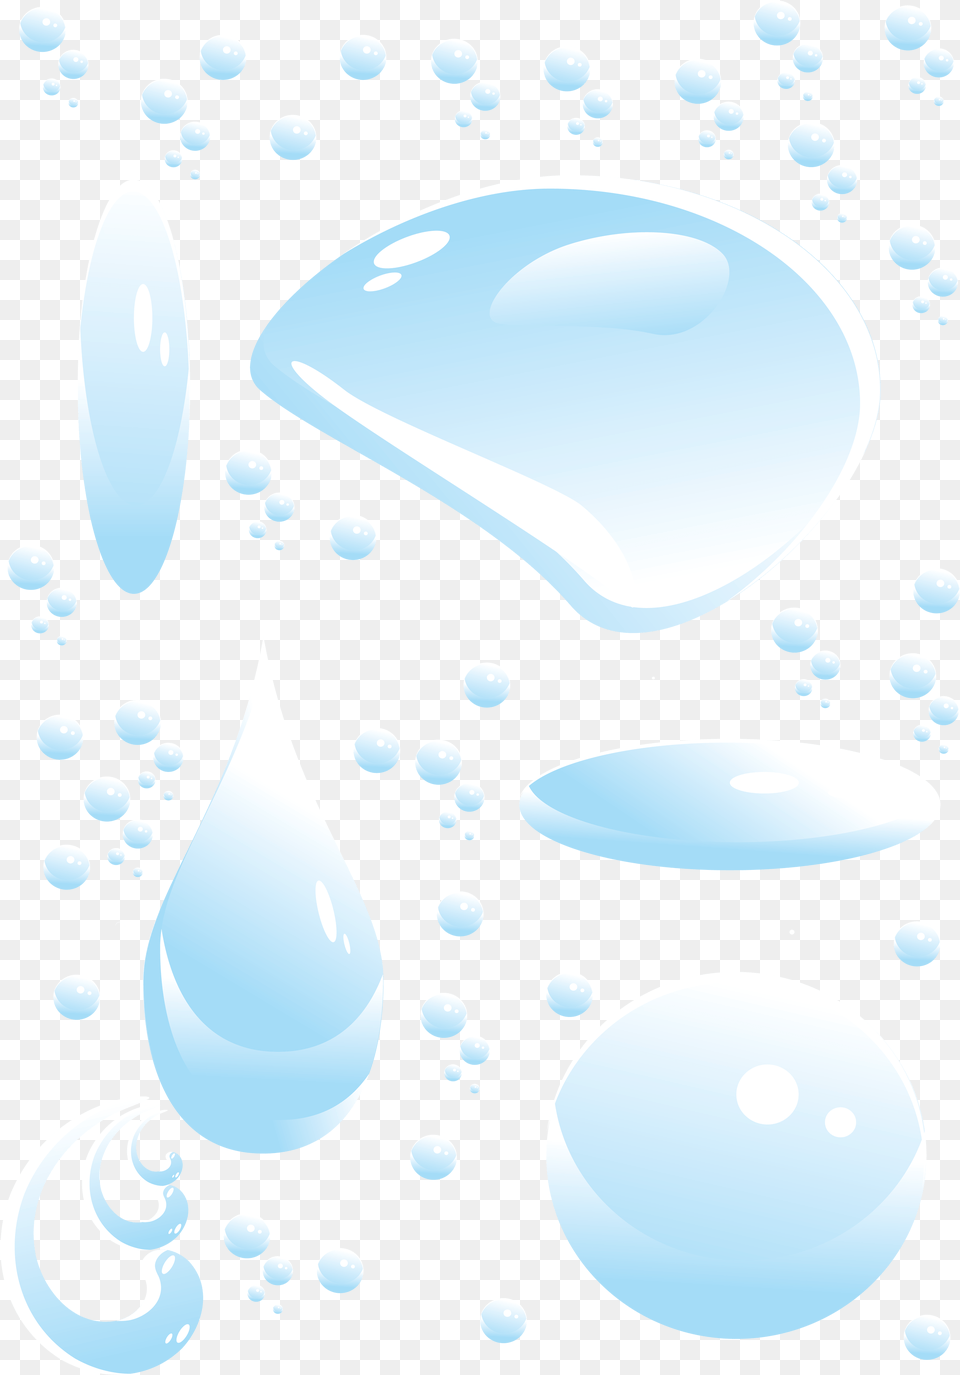 Image Icon Favicon Portable Network Graphics, Art, Droplet, Outdoors, Nature Free Png